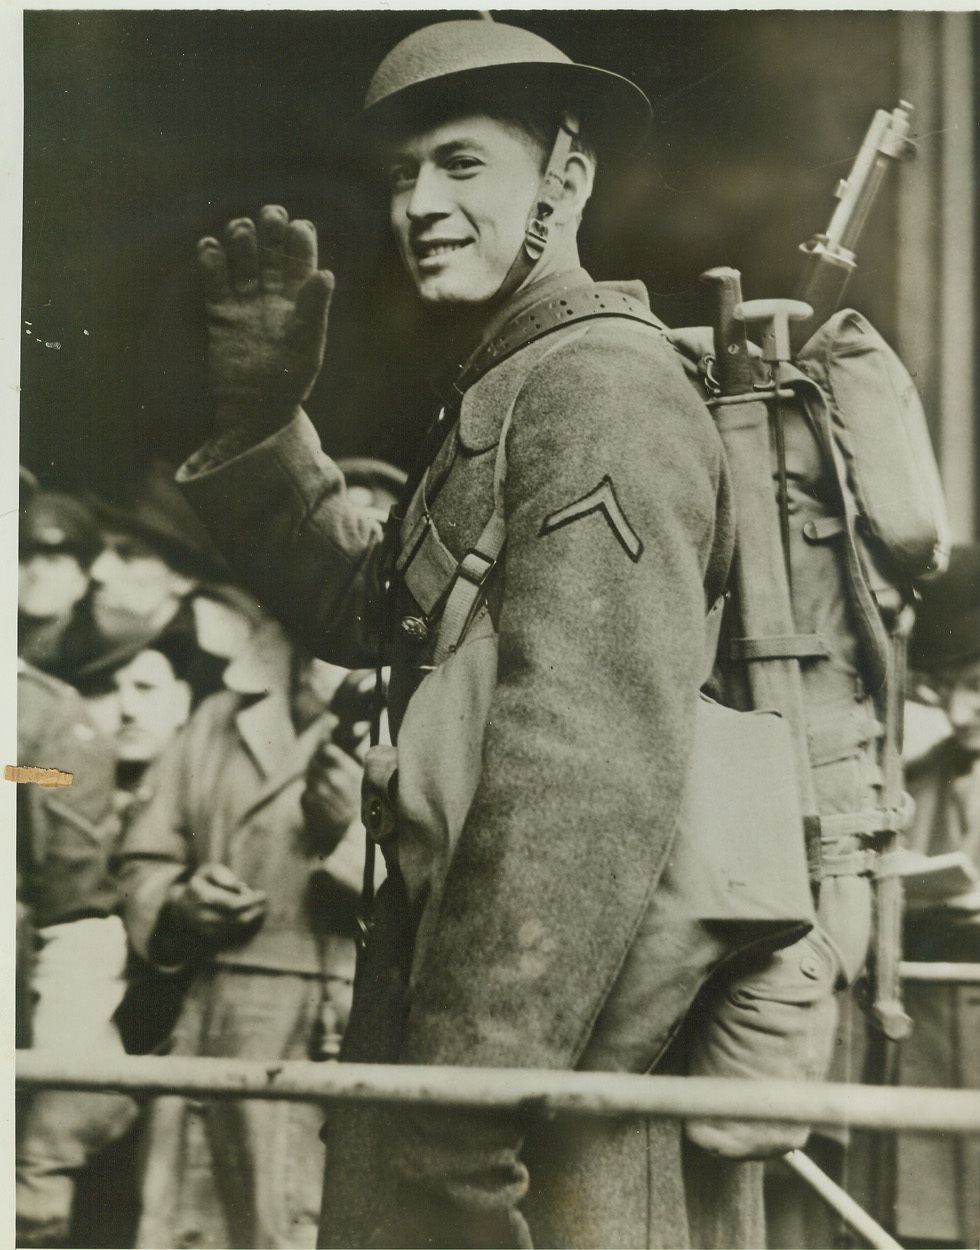 First American Soldier Lands in Ireland, 2/8/1942. NORTHERN IRELAND -- Pvt. Milburn Henke, of Hutchinson, Minn., waves as he walks ashore in Northern Ireland, first American soldier to set foot on British Island soil during World War II. He was selected at random from the ranks by the commanding officer of the expeditionary force, Maj. Gen. Russell P. Hartle. Credit: (ACME);